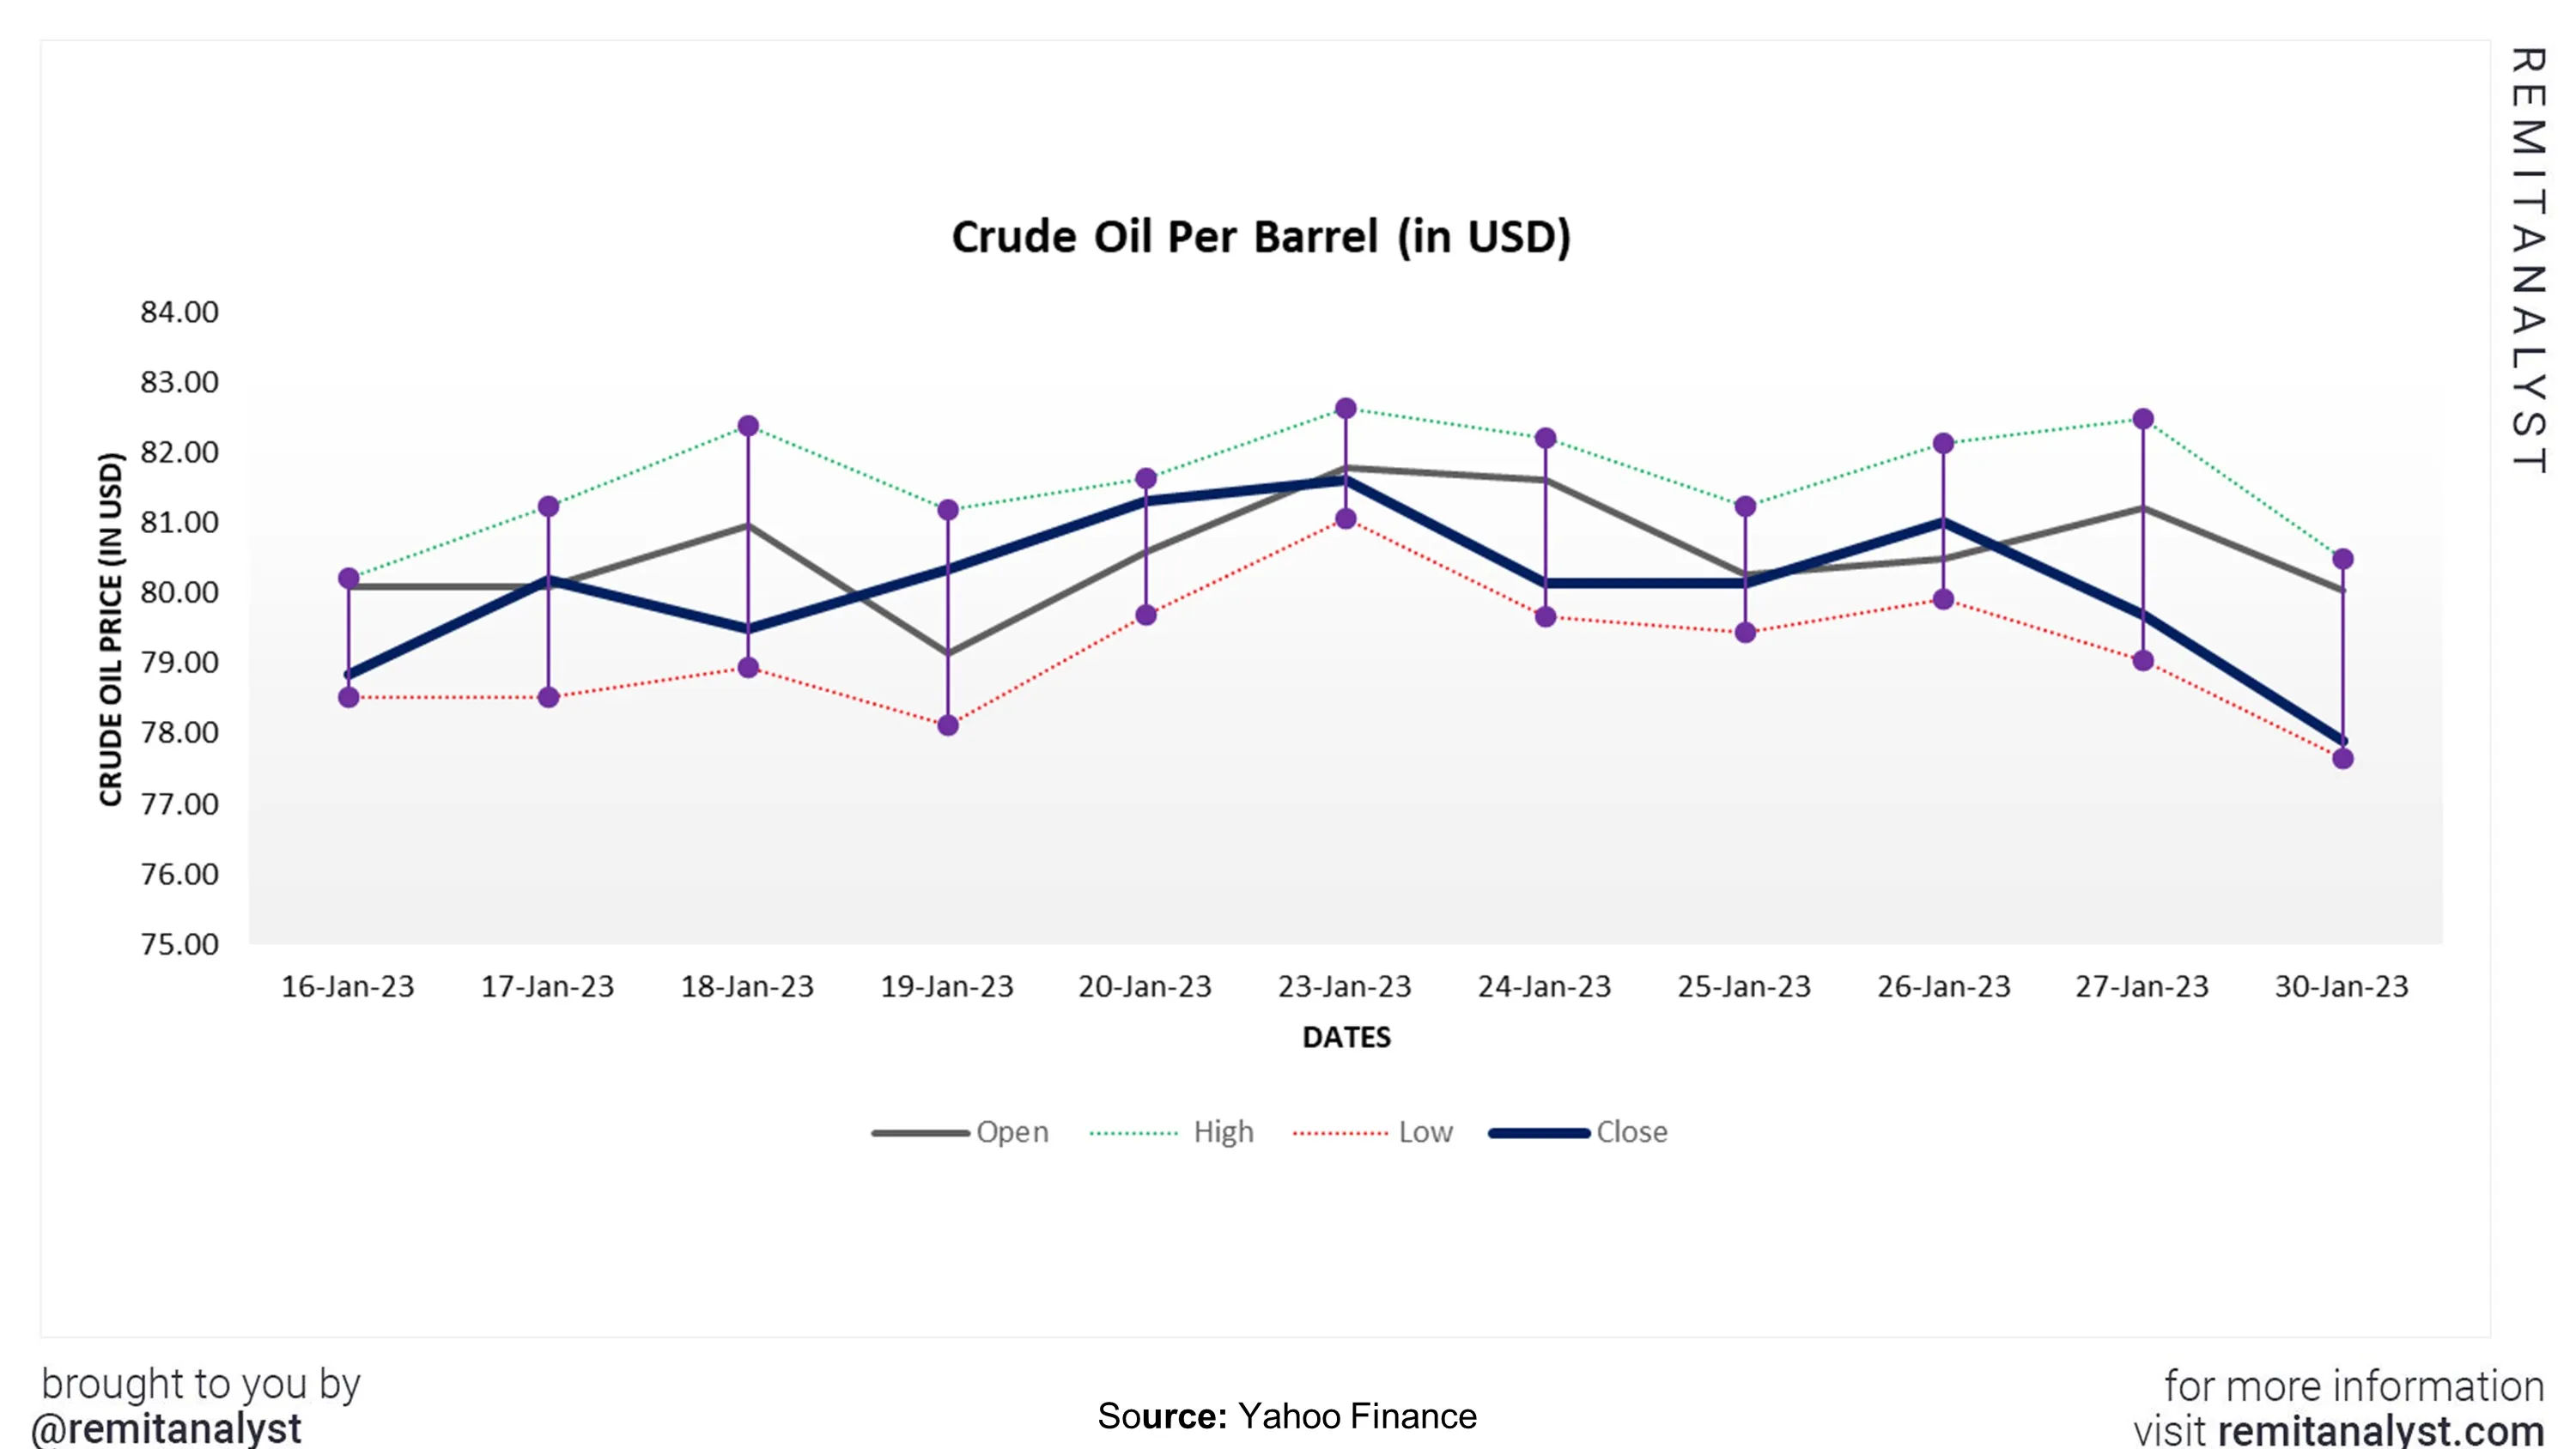 crude-oil-prices-from-16-jan-2023-to-30-jan-2023